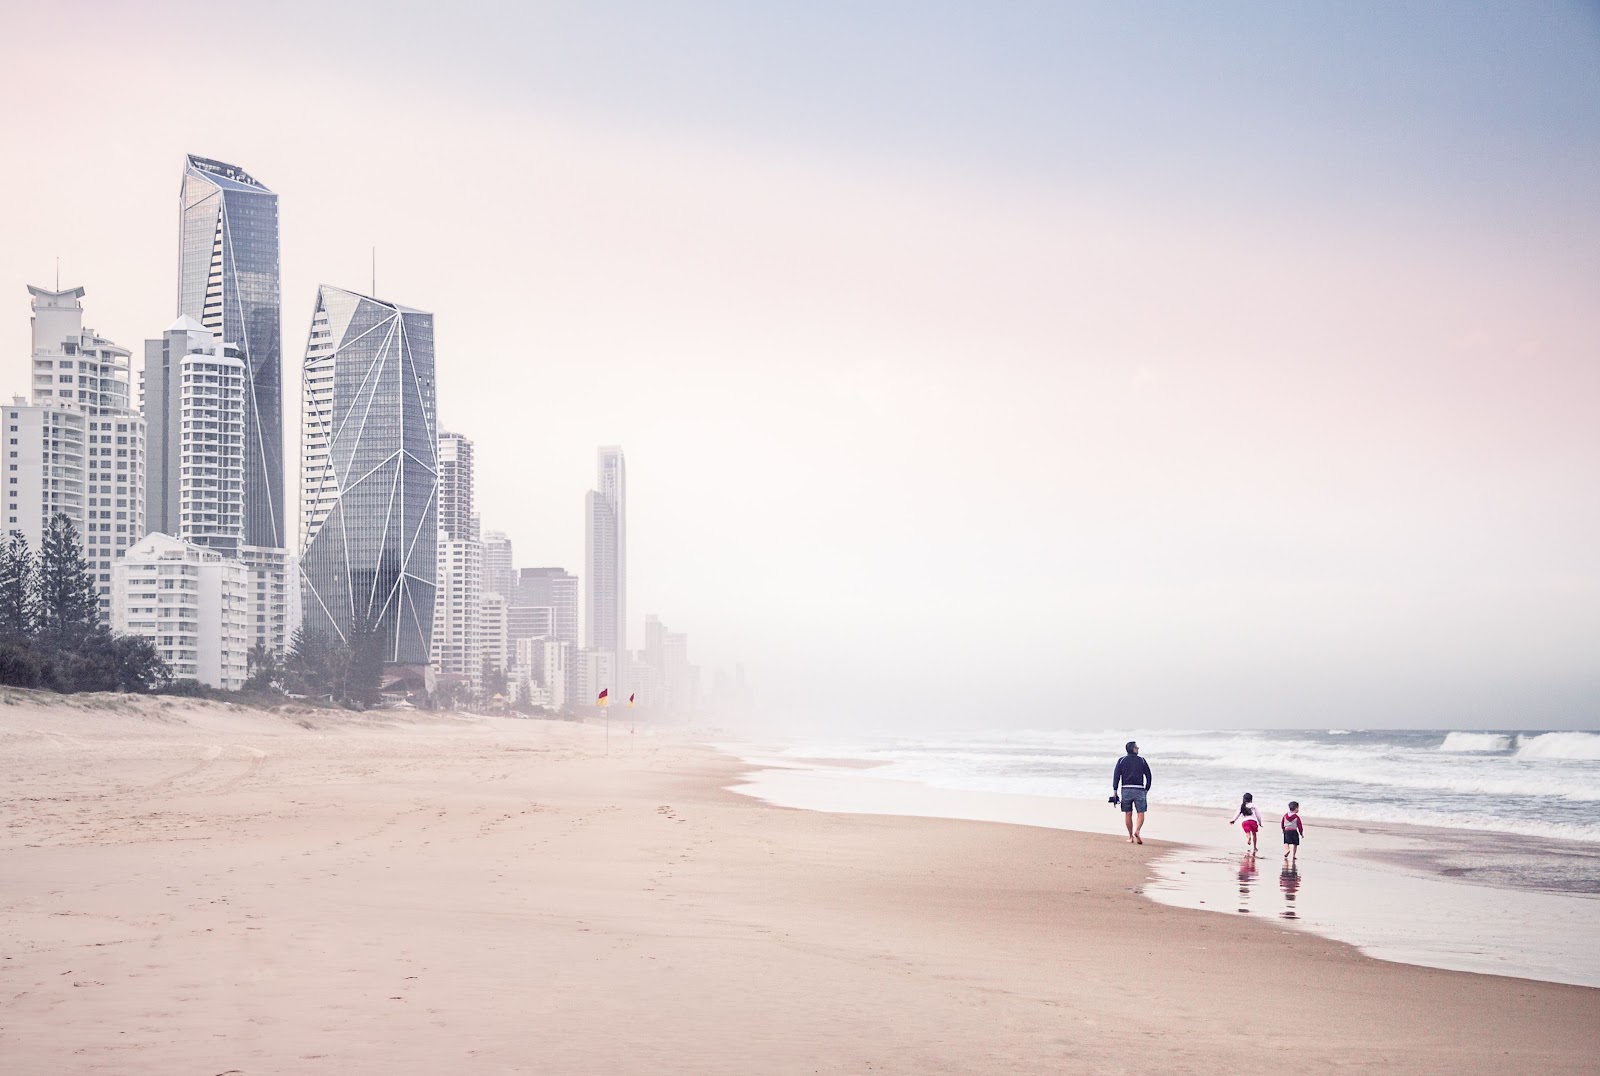 Photoshoot at a beach in Gold Coast with highrise buildings in the background